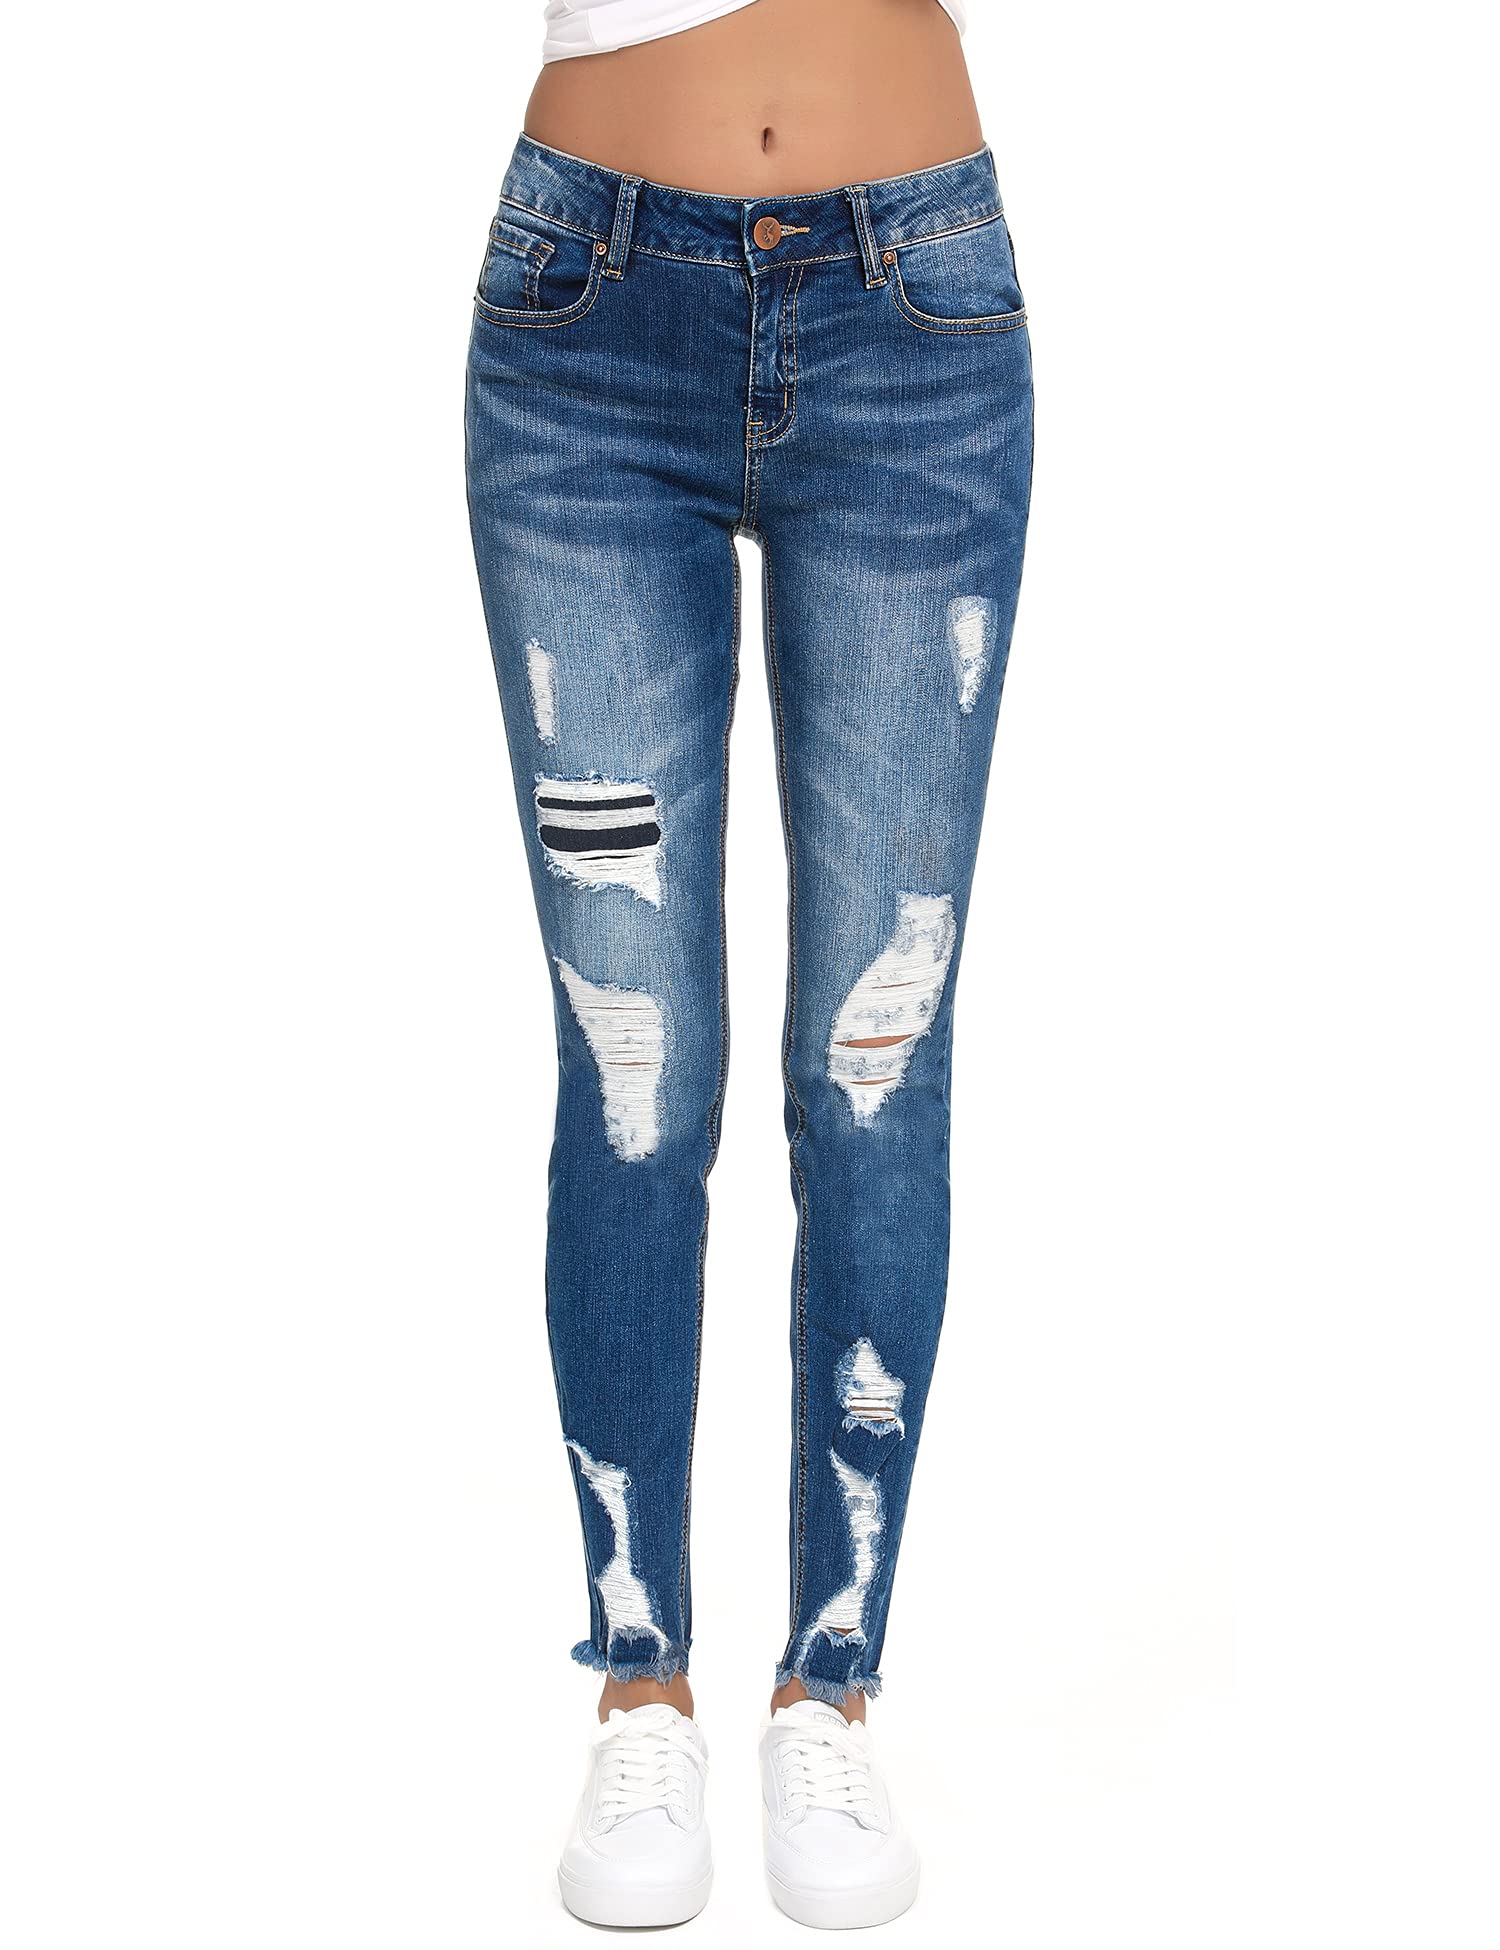 Resfeber Womens Ripped Boyfriend Jeans cute Distressed Jeans Stretch Skinny Jeans with Hole